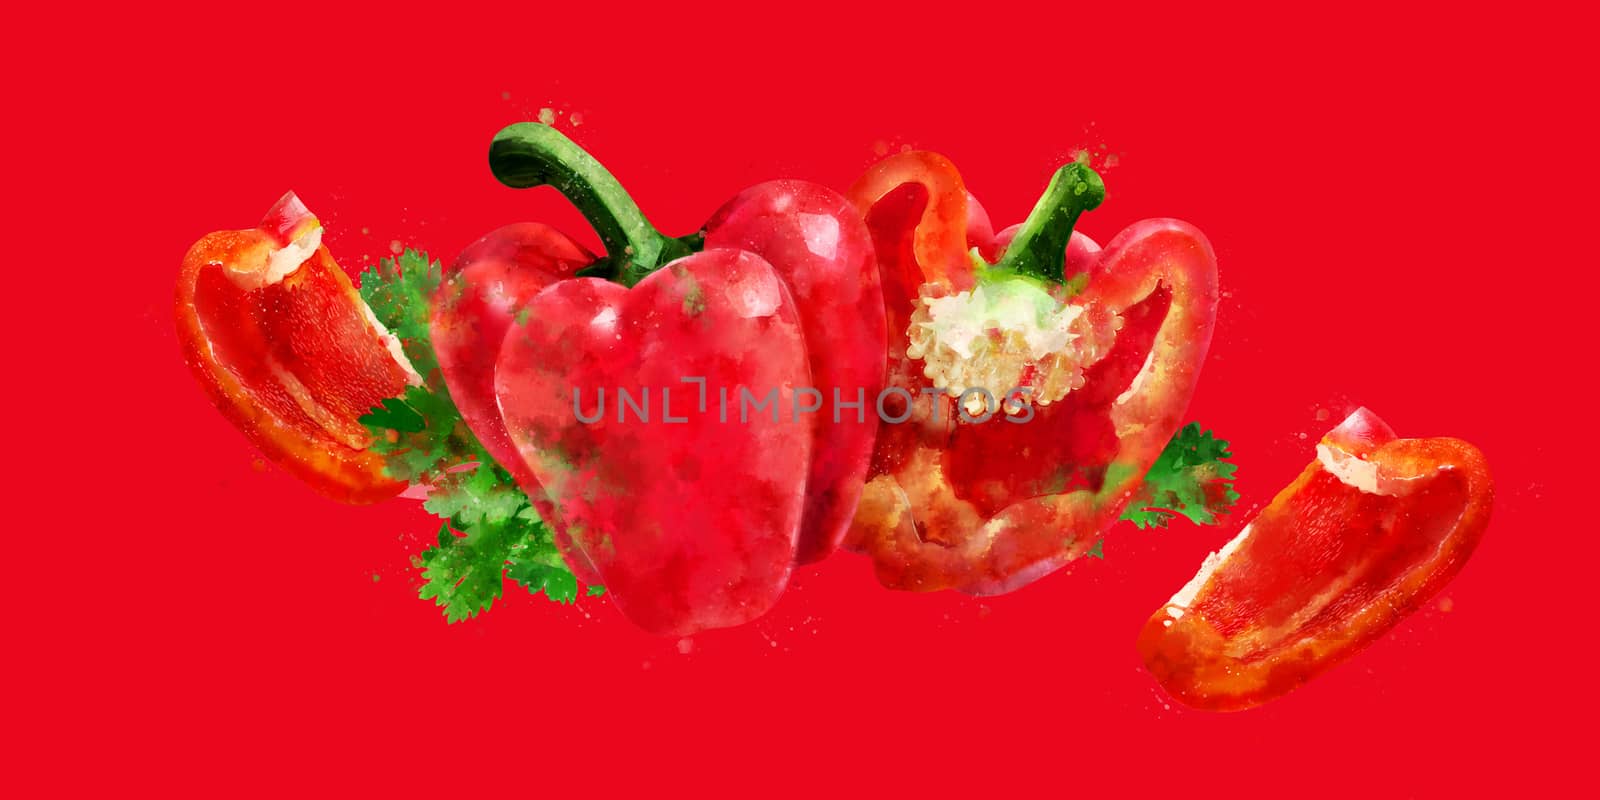 Red Pepper on red background. Watercolor illustration by ConceptCafe